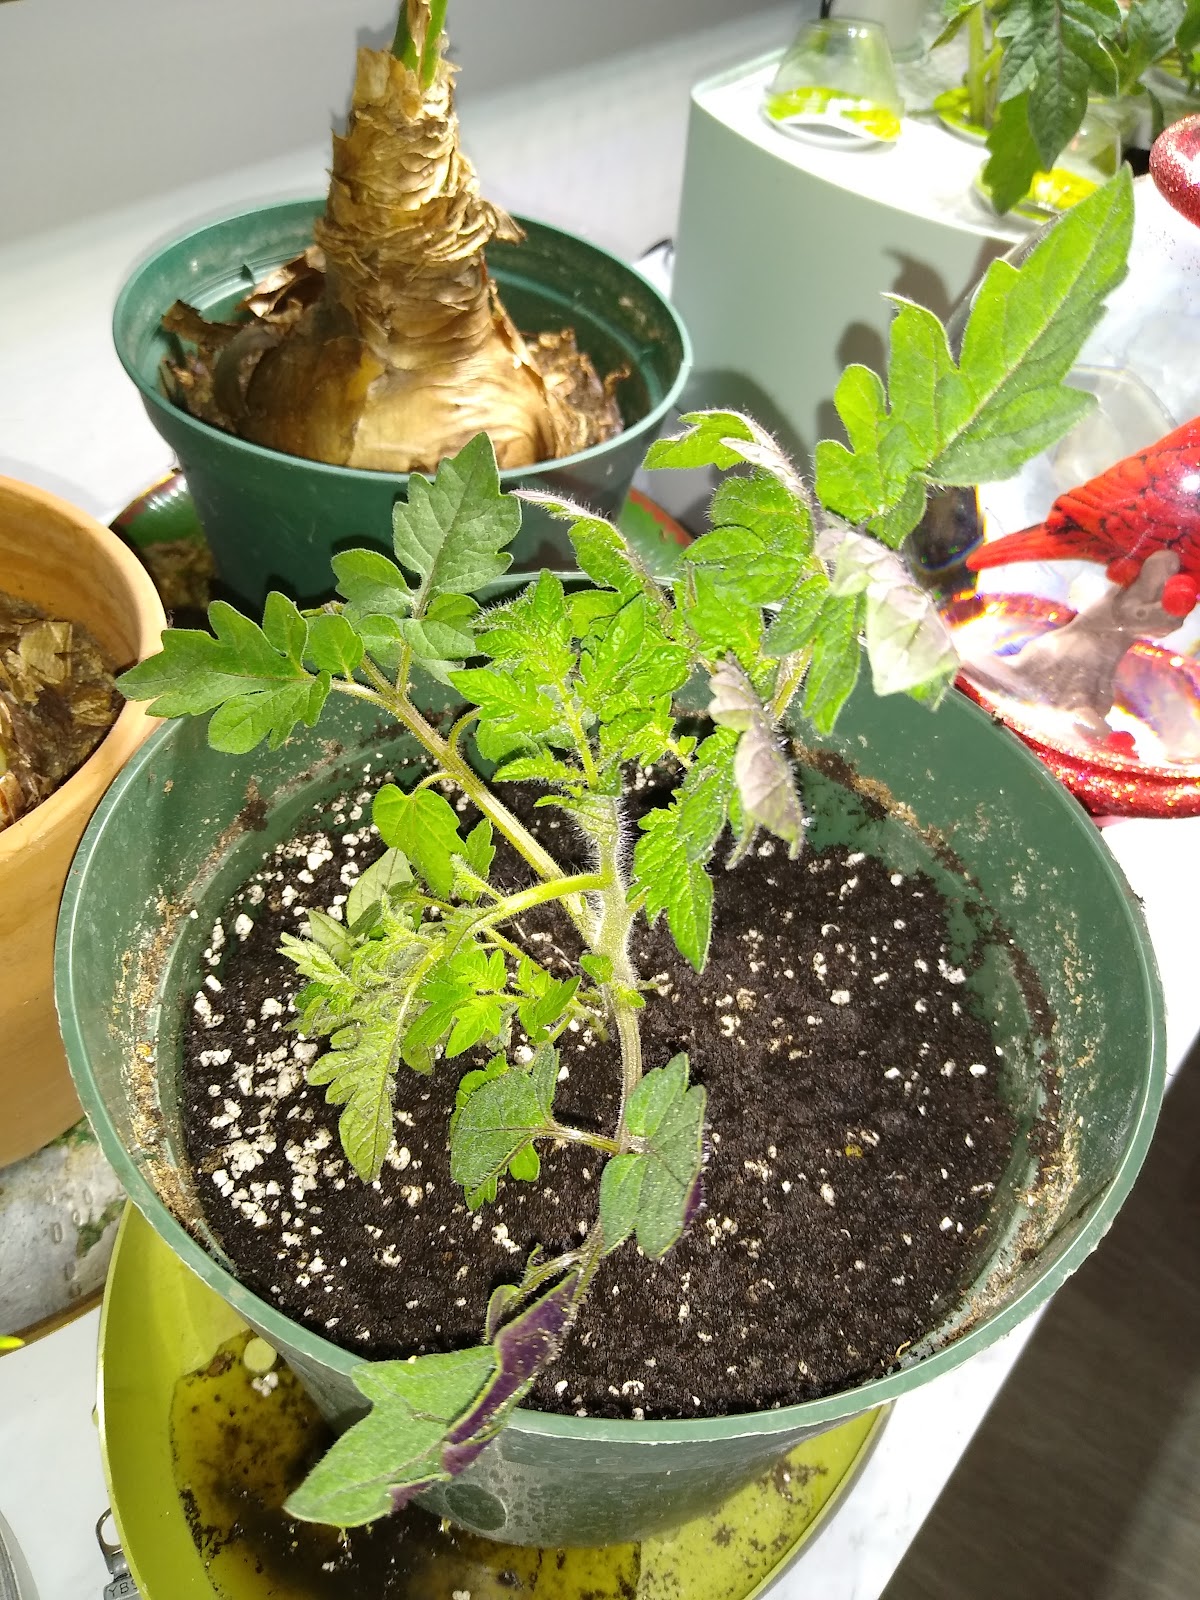 transplanting tomato plants from water to soil